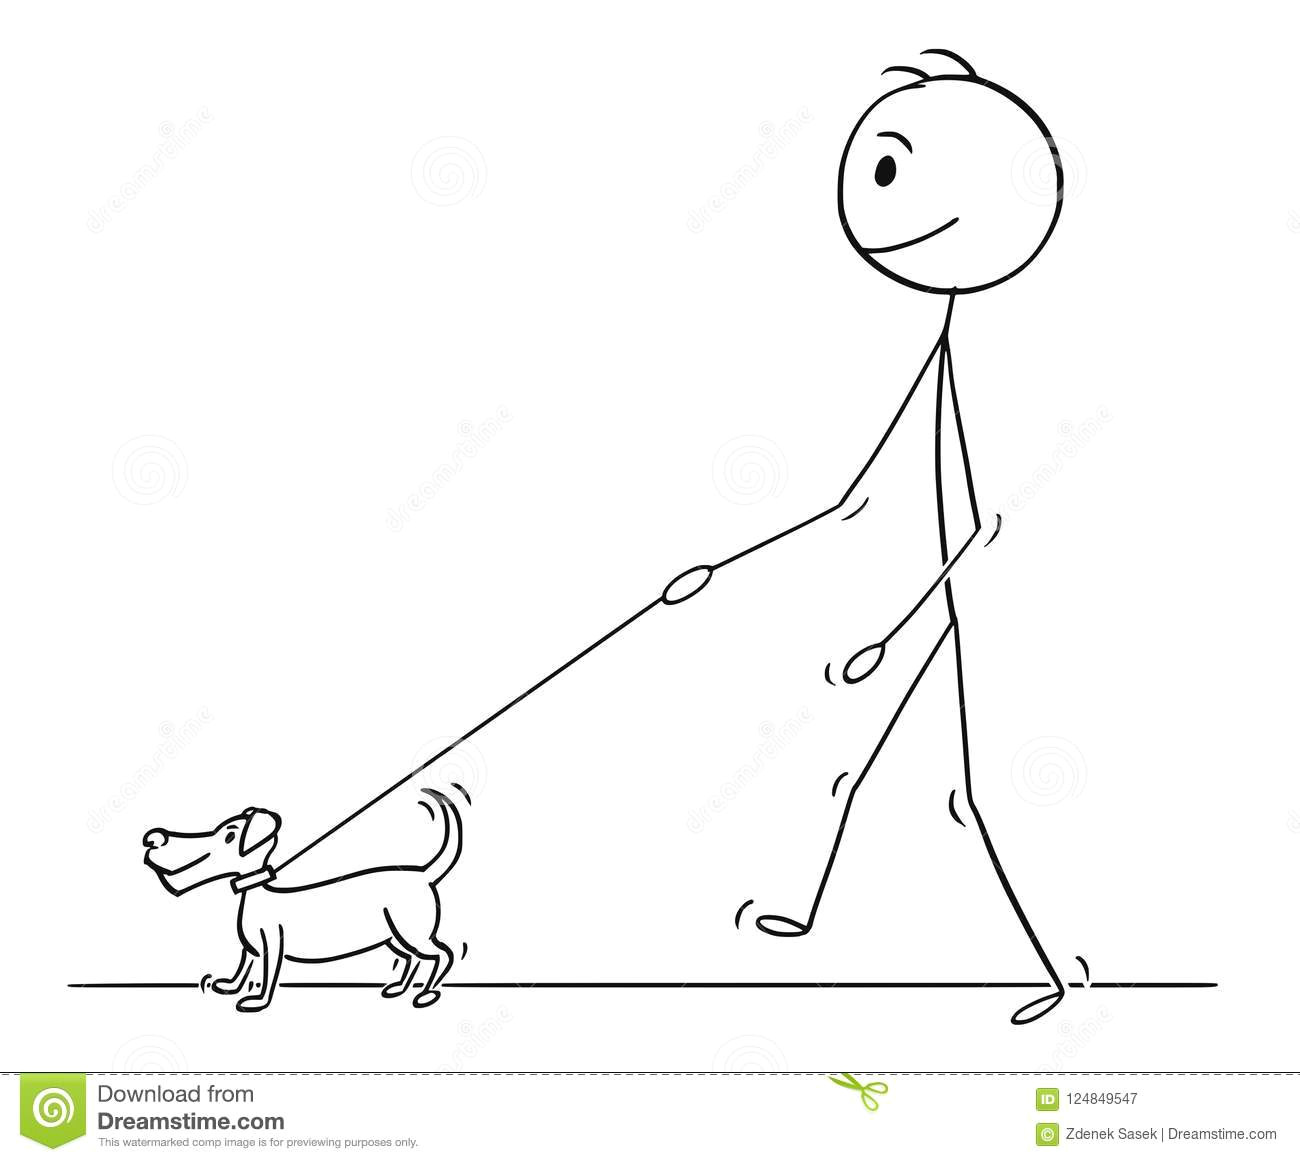 cartoon stick drawing conceptual illustration of man walking with small dog on a leash